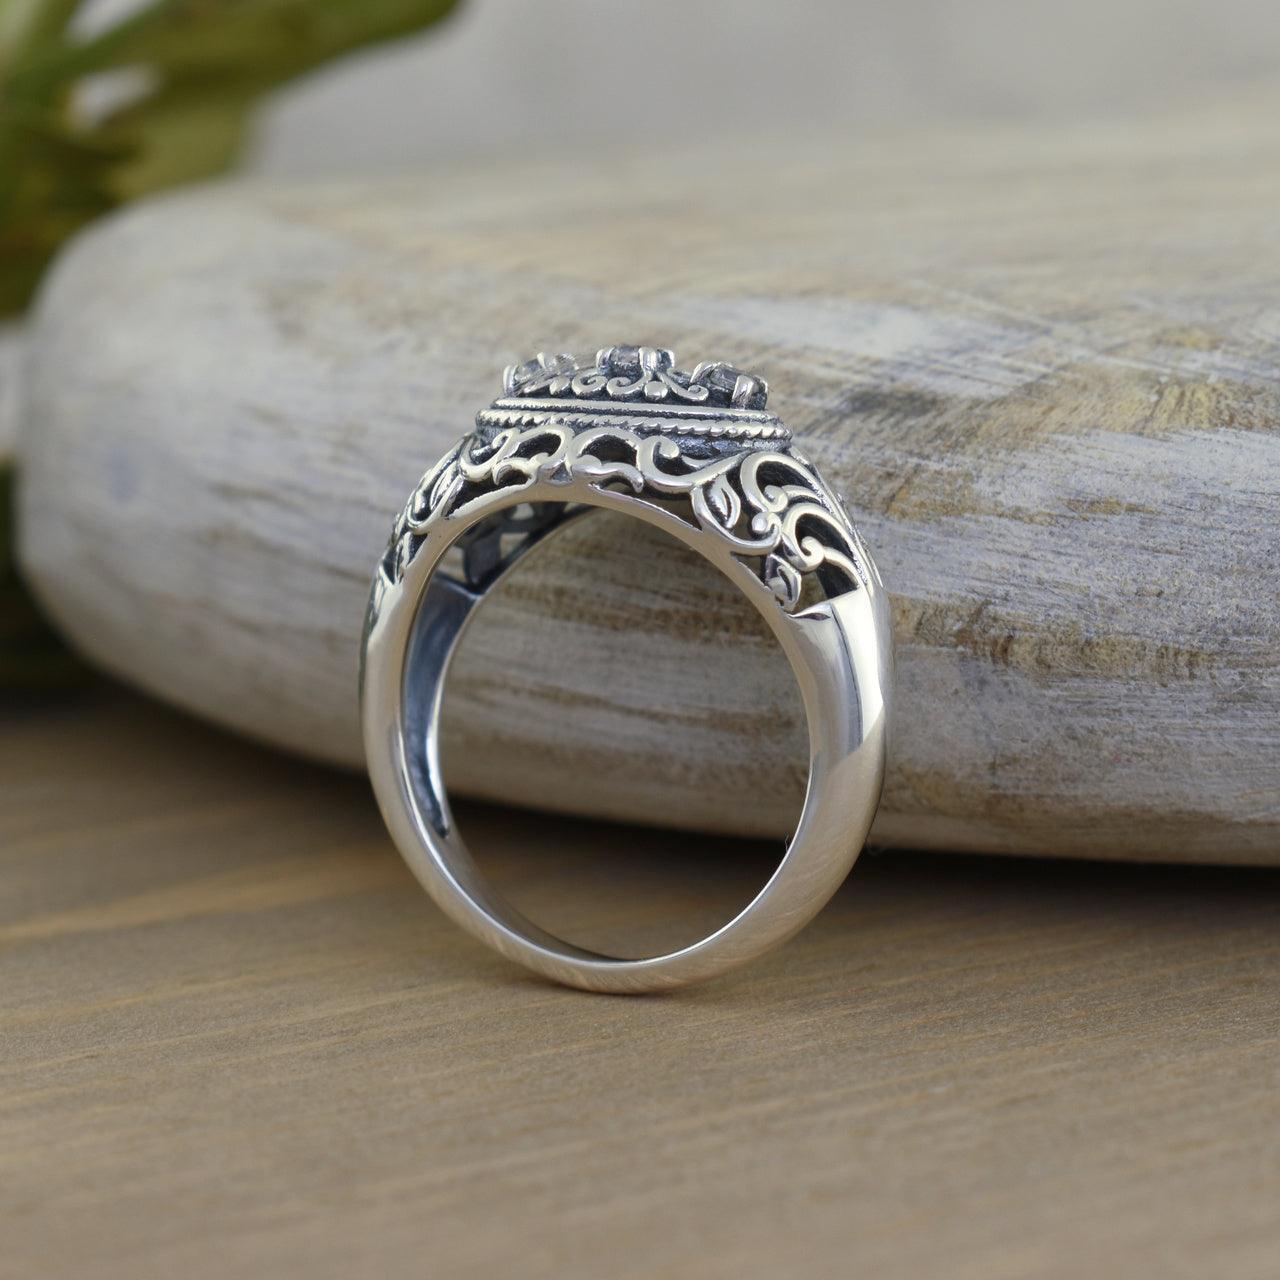 Handcrafted sterling silver vintage ring with filigree swirl background